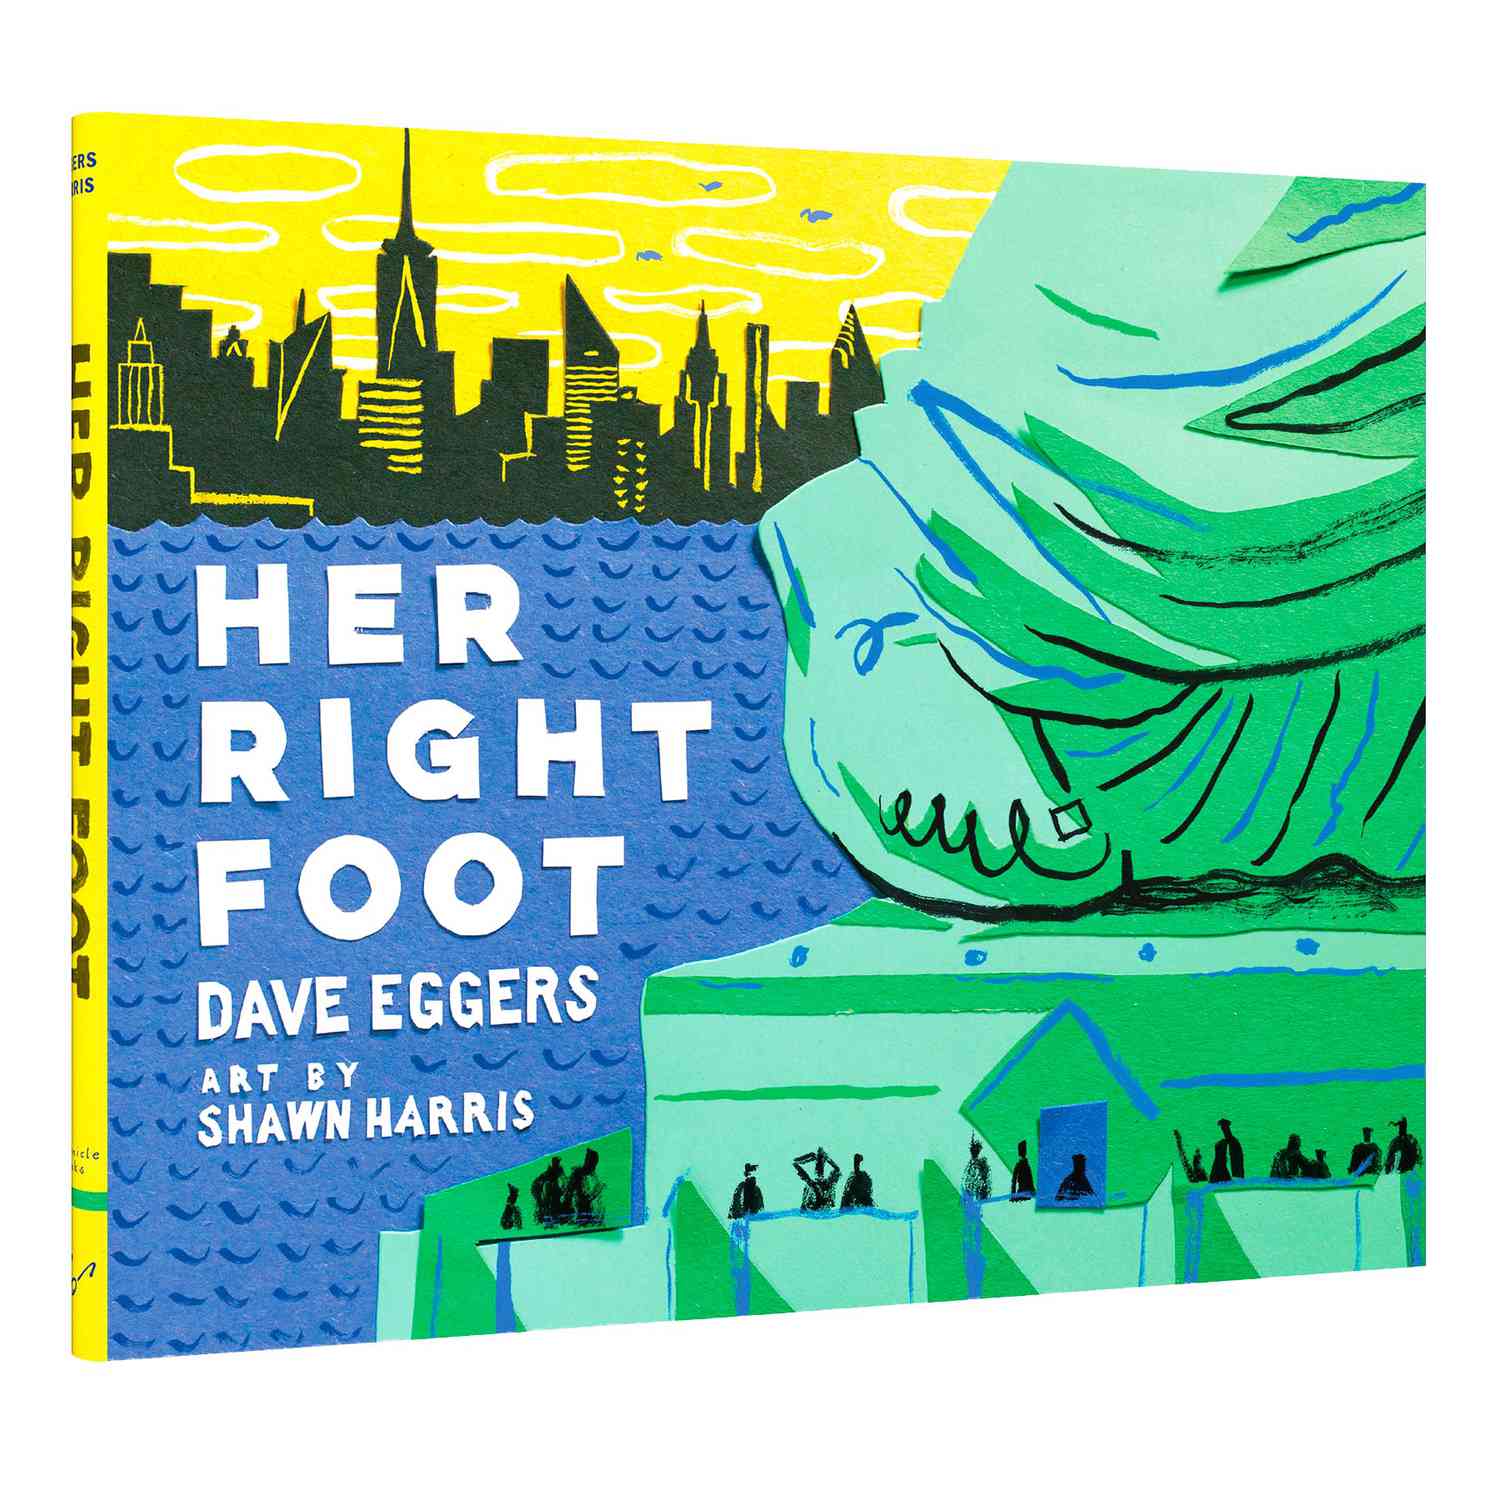 Her Right Foot&nbsp;by Dave Eggers